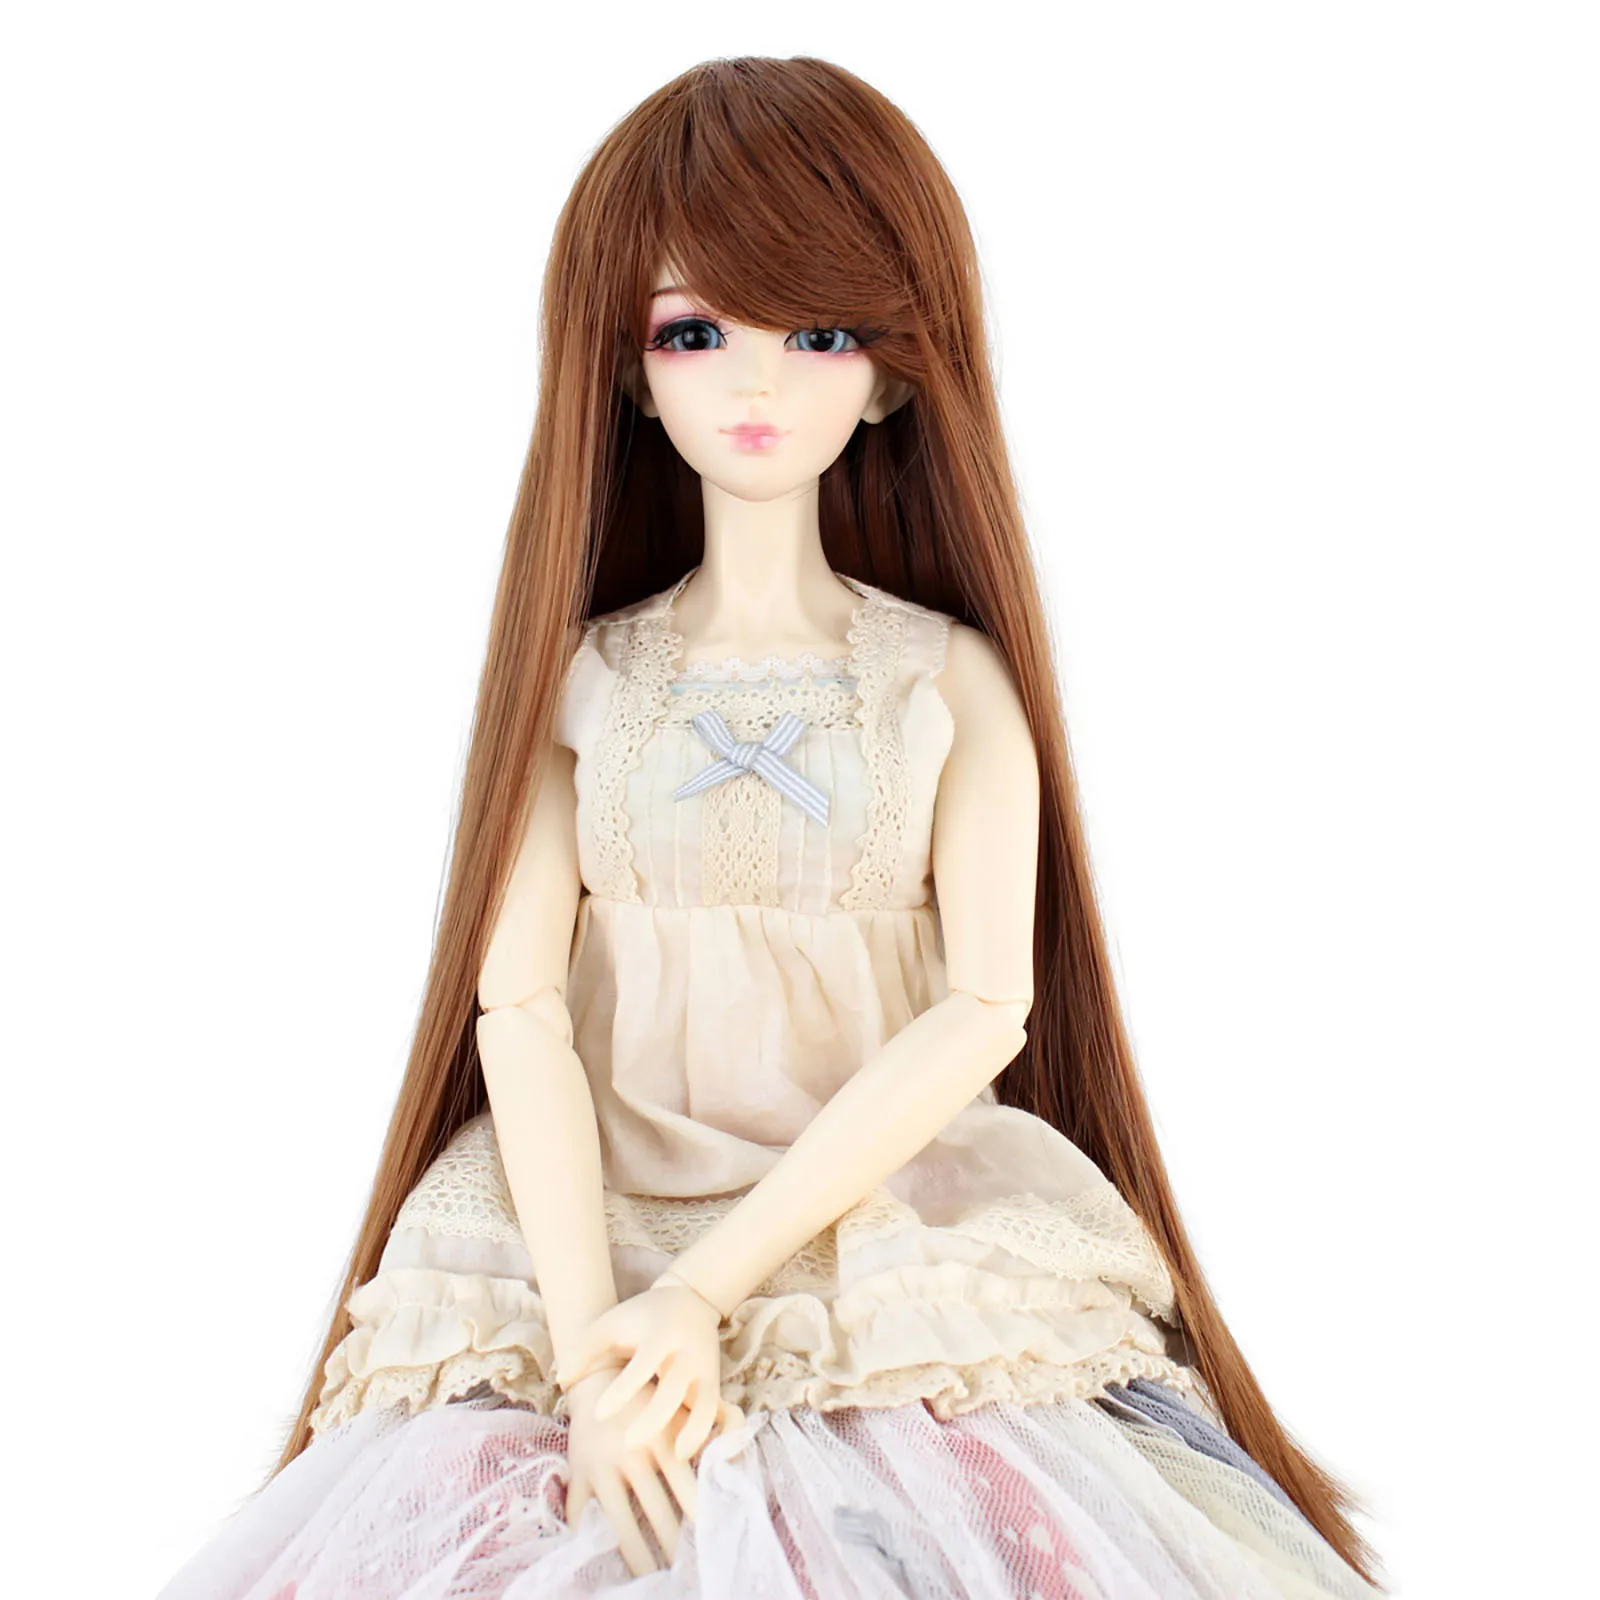 

Miss U Hair Synthetic Long Straight 8-9 Inch 1/3 BJD Wig MSD DOD Pullip Dollfie Doll Red Handmade Hair Accessories